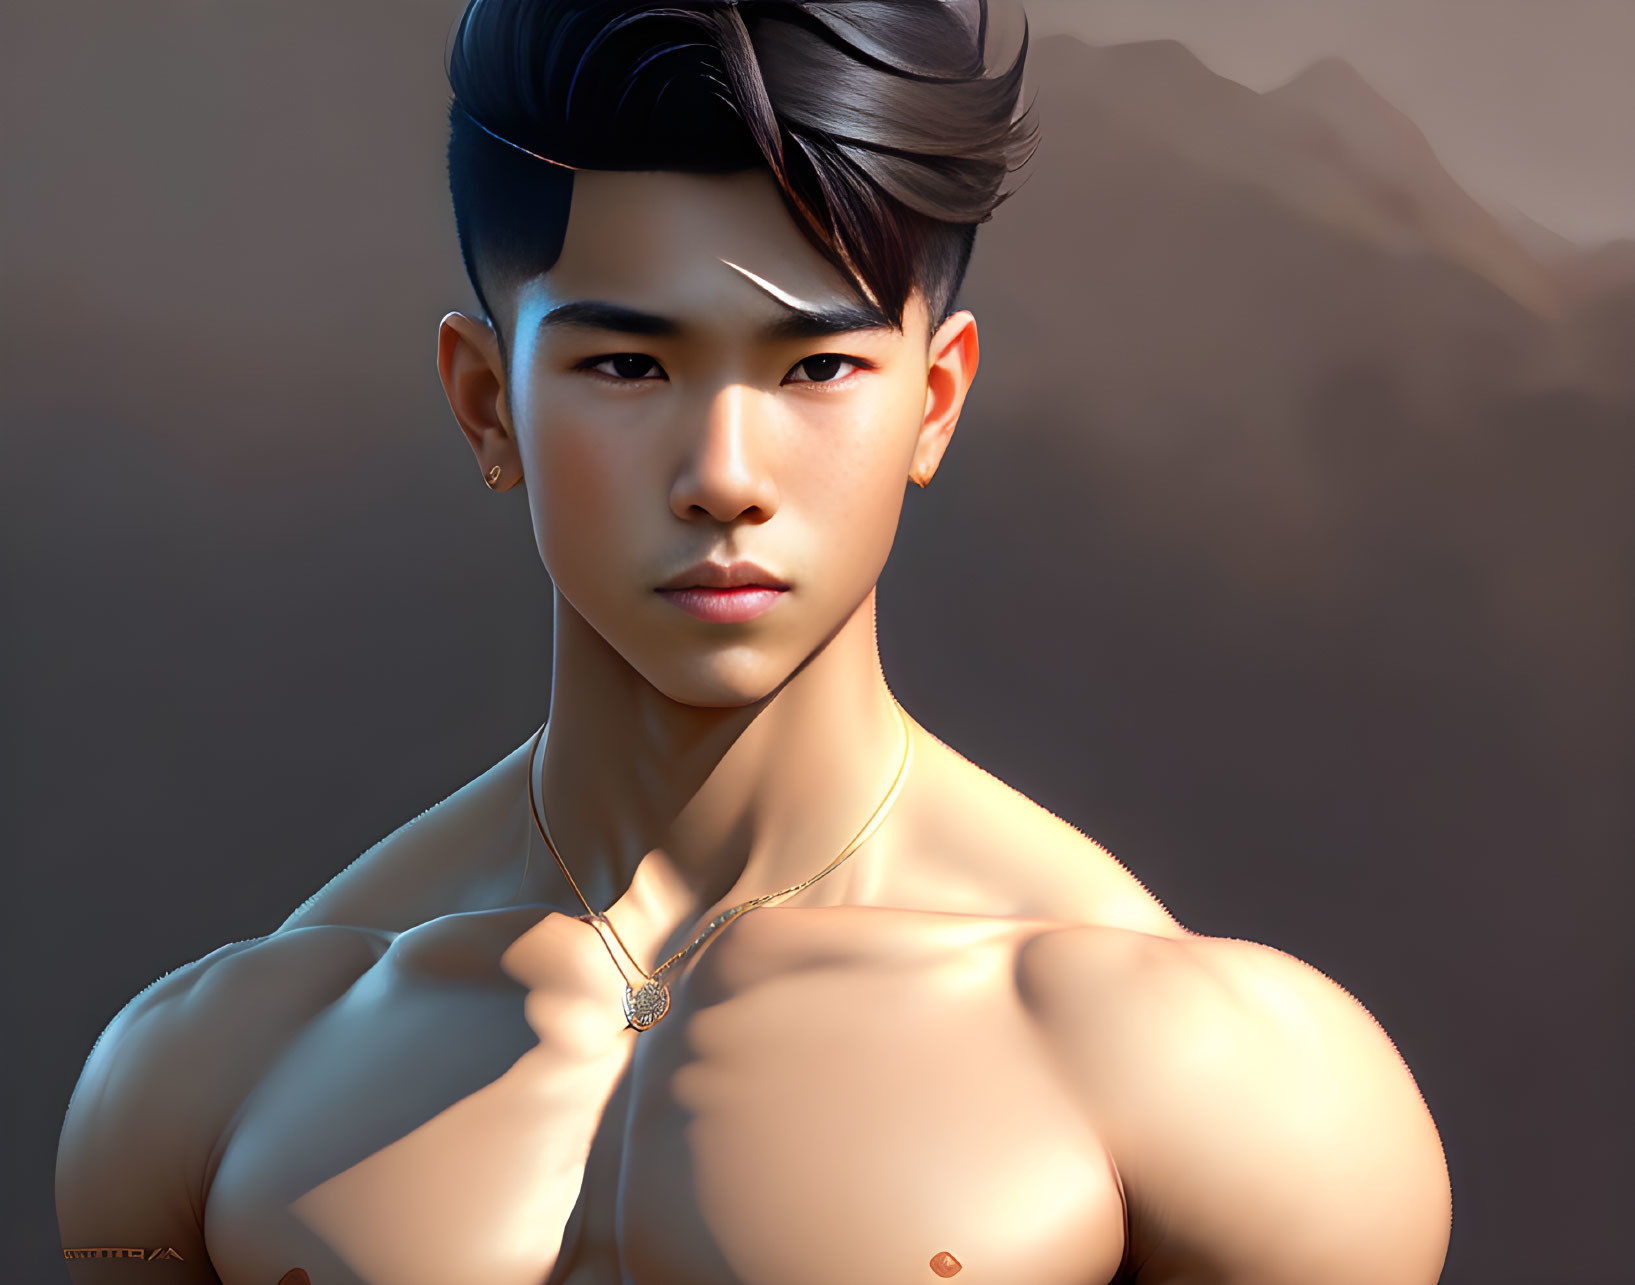 Muscular shirtless male figure with stylish haircut and necklace.